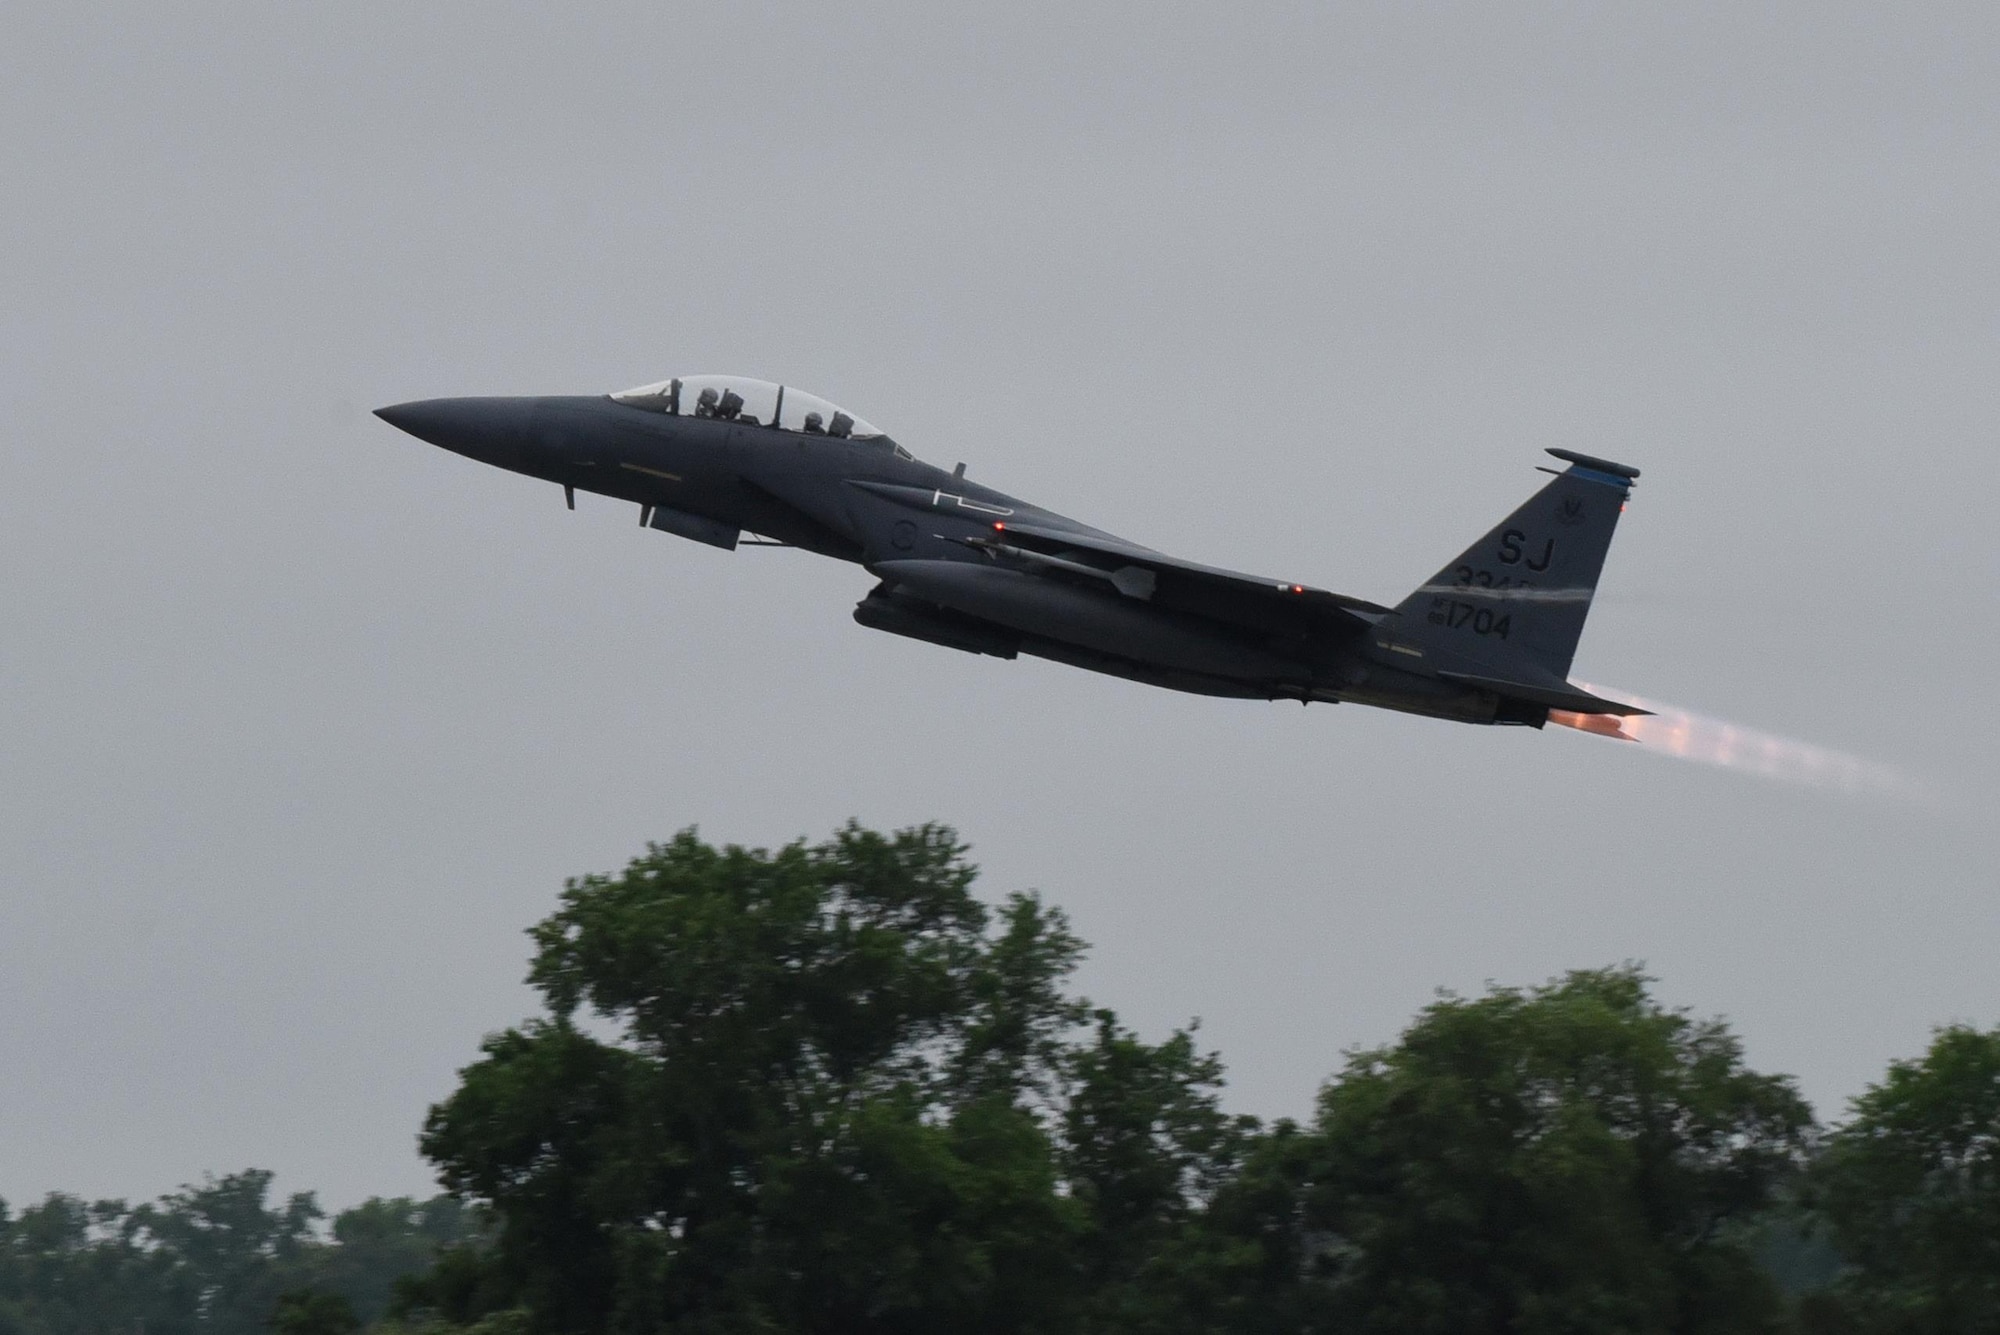 An F-15E Strike Eagle takes off to participate in exercise Razor Talon, May 12, 2017, at Seymour Johnson Air Force Base, North Carolina. The Strike Eagle is designed to complete air-to-air and air-to-ground missions. (U.S. Air Force photo by Airman 1st Class Victoria Boyton)